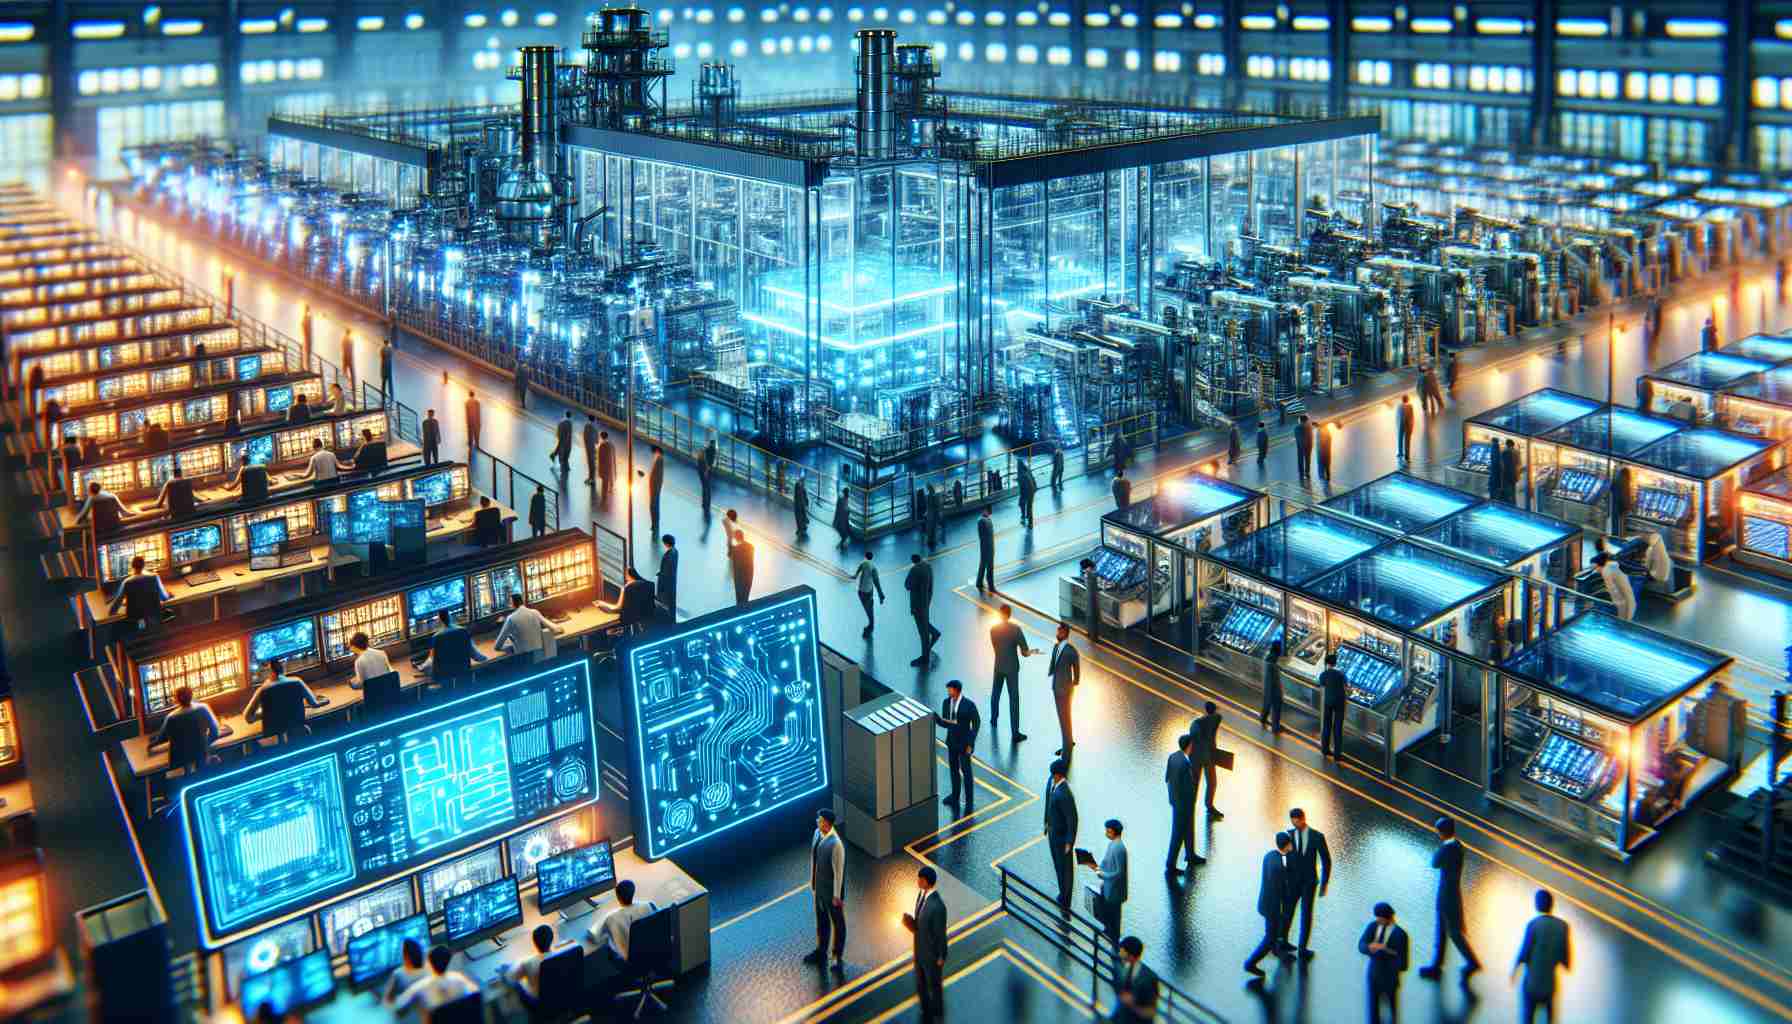 Depict a high definition, realistic image showcasing the thriving state of a fictional modern semiconductor manufacturing company during an era of advanced technology. Showcase futuristic machinery, advanced manufacturing units with a vibrant working environment filled with multiracial employees engaged in inspecting machines, conducting meetings, and analyzing data on high-tech devices. Incorporate an aura of innovation, progress, and industry success.